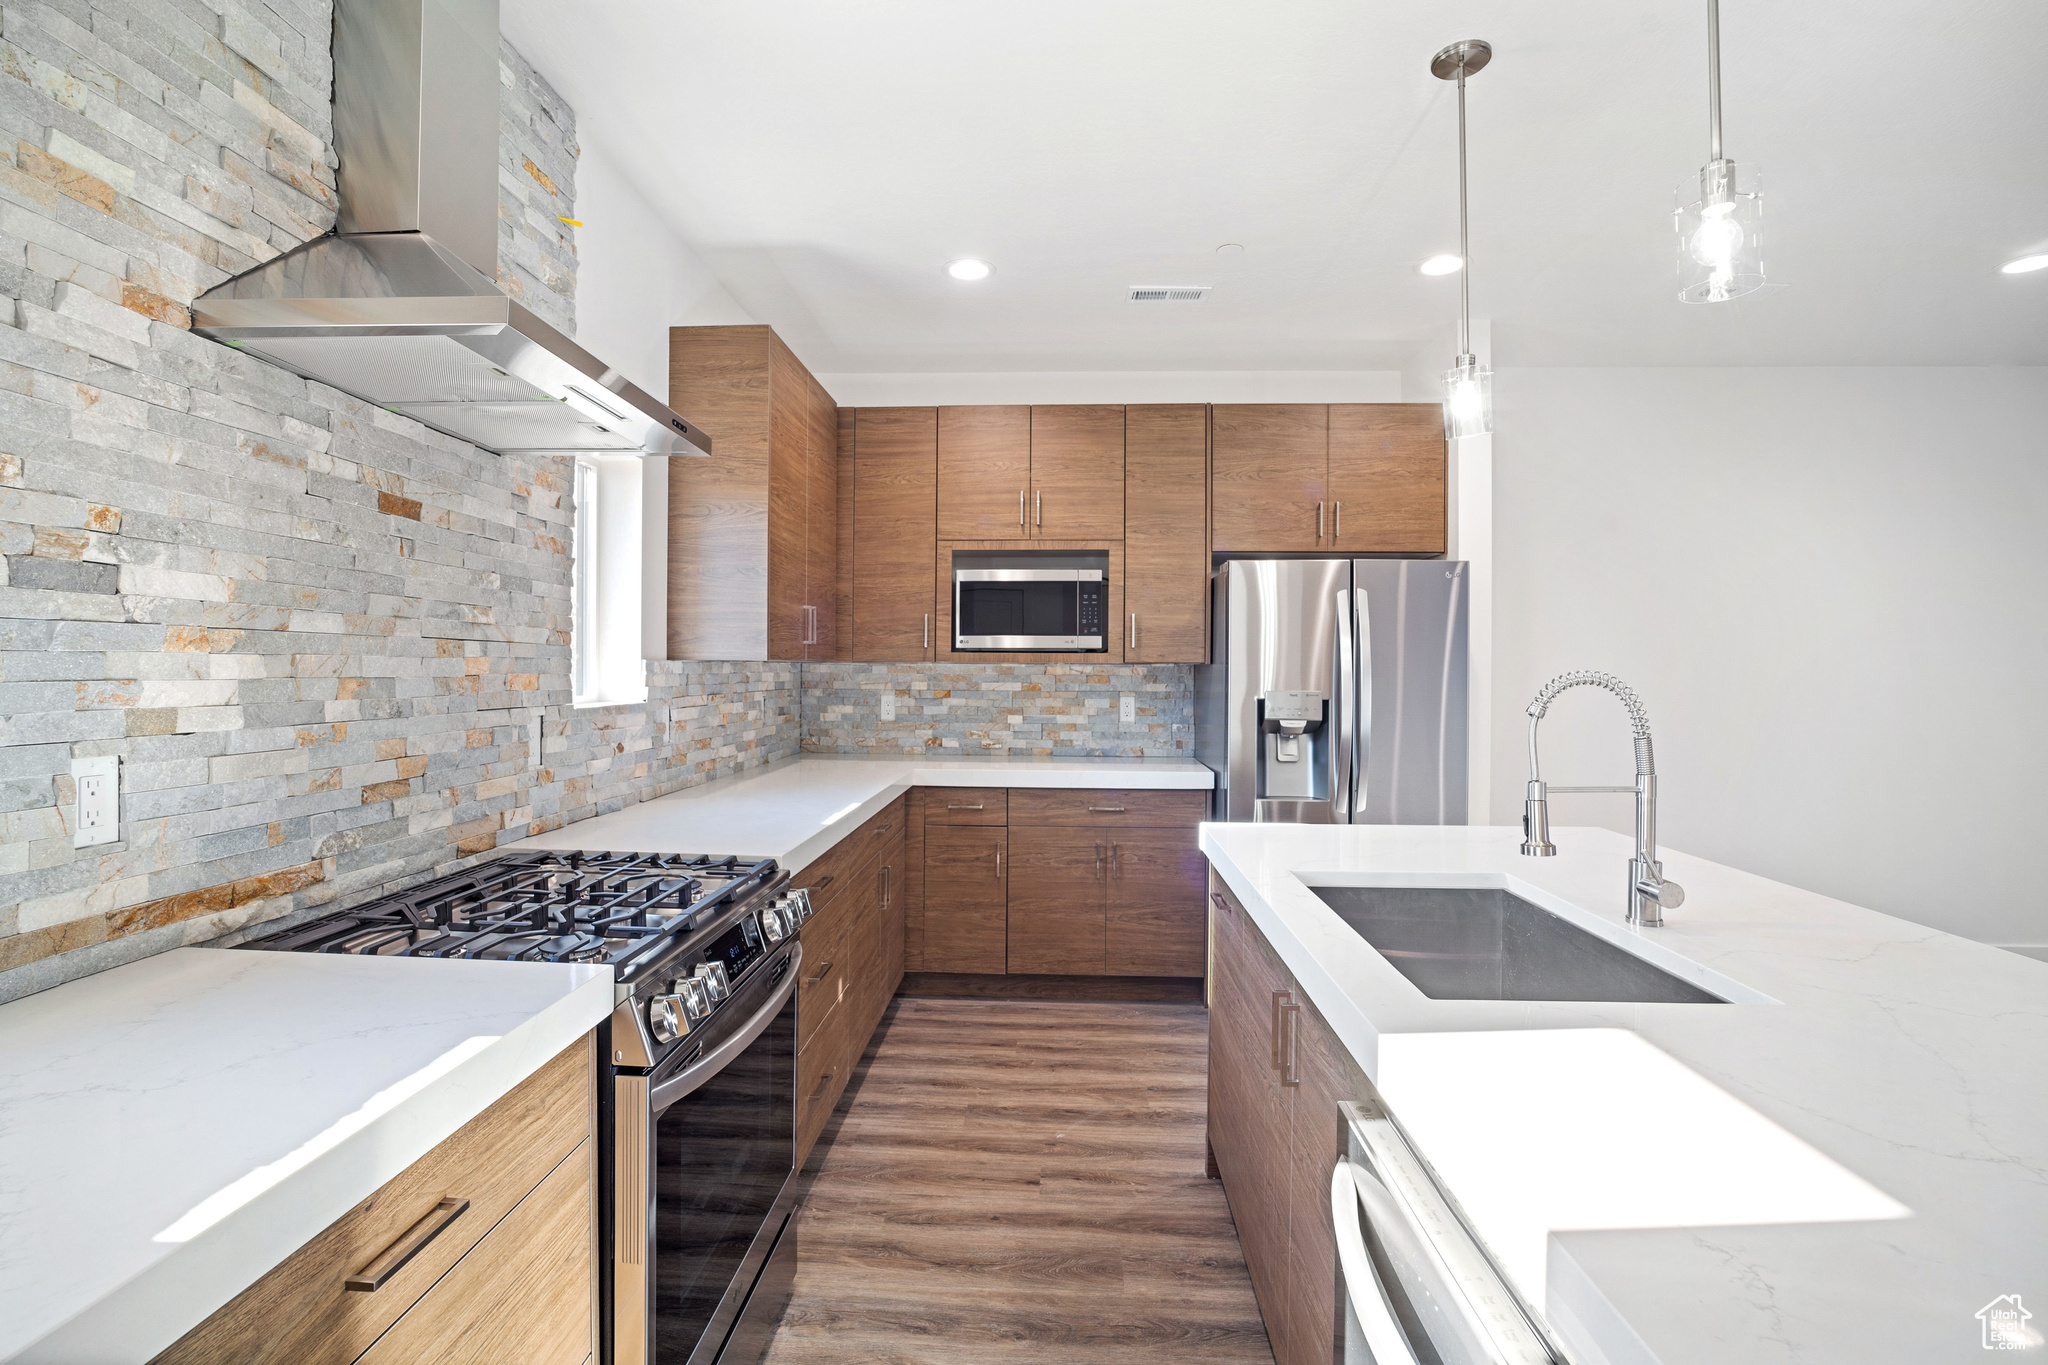 Kitchen with backsplash, sink, dark hardwood / wood-style floors, appliances with stainless steel finishes, and wall chimney exhaust hood